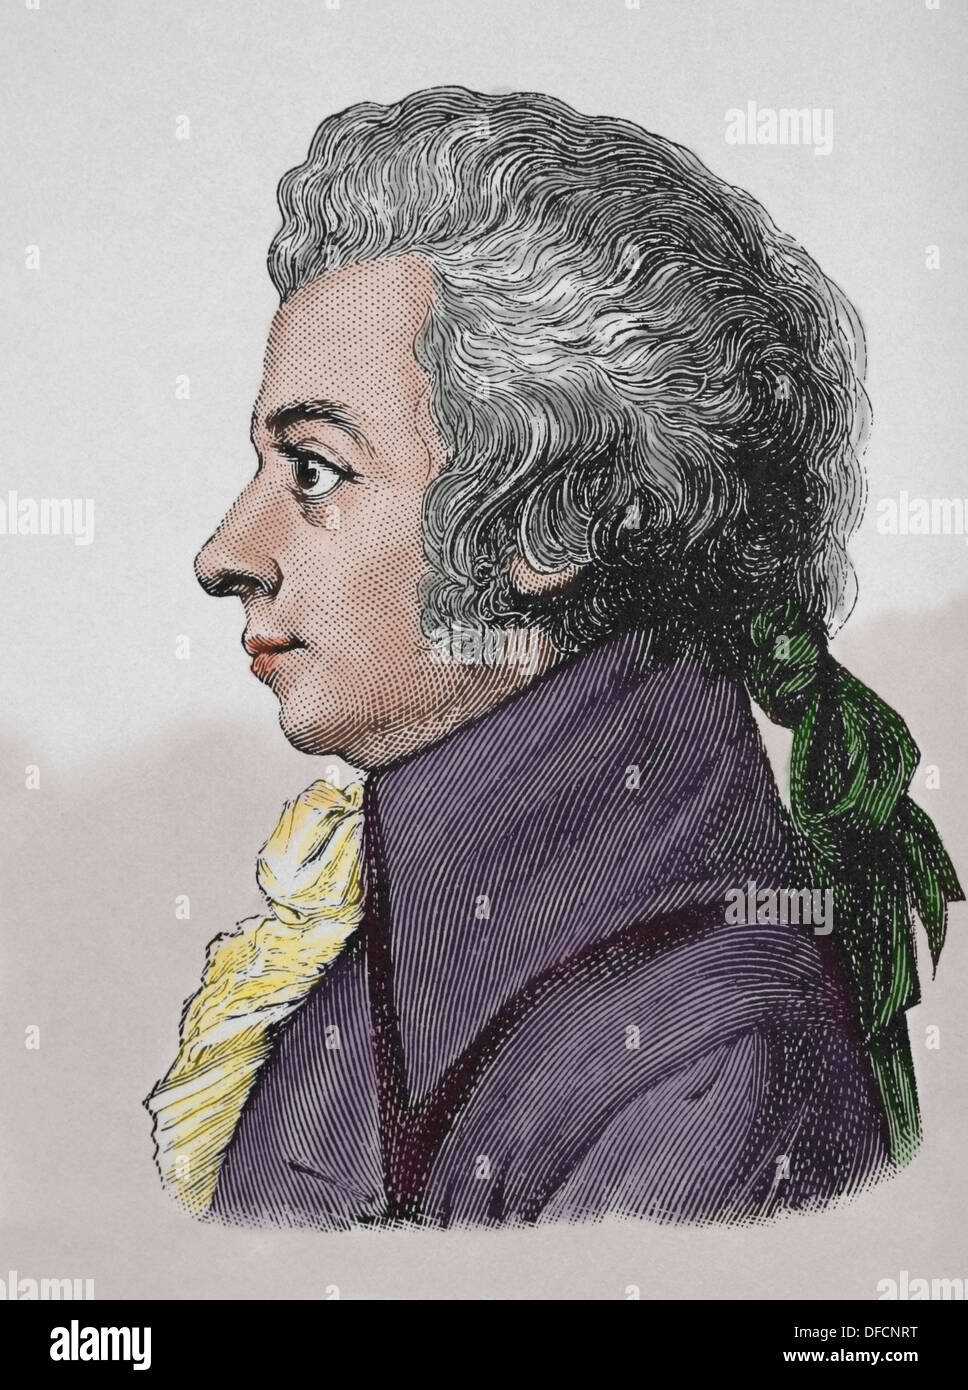 Wolfgang Amadeus Mozart ((1756 – 1791). Composer of the Classical era. Engraving (later colouration). 19th century. Stock Photo